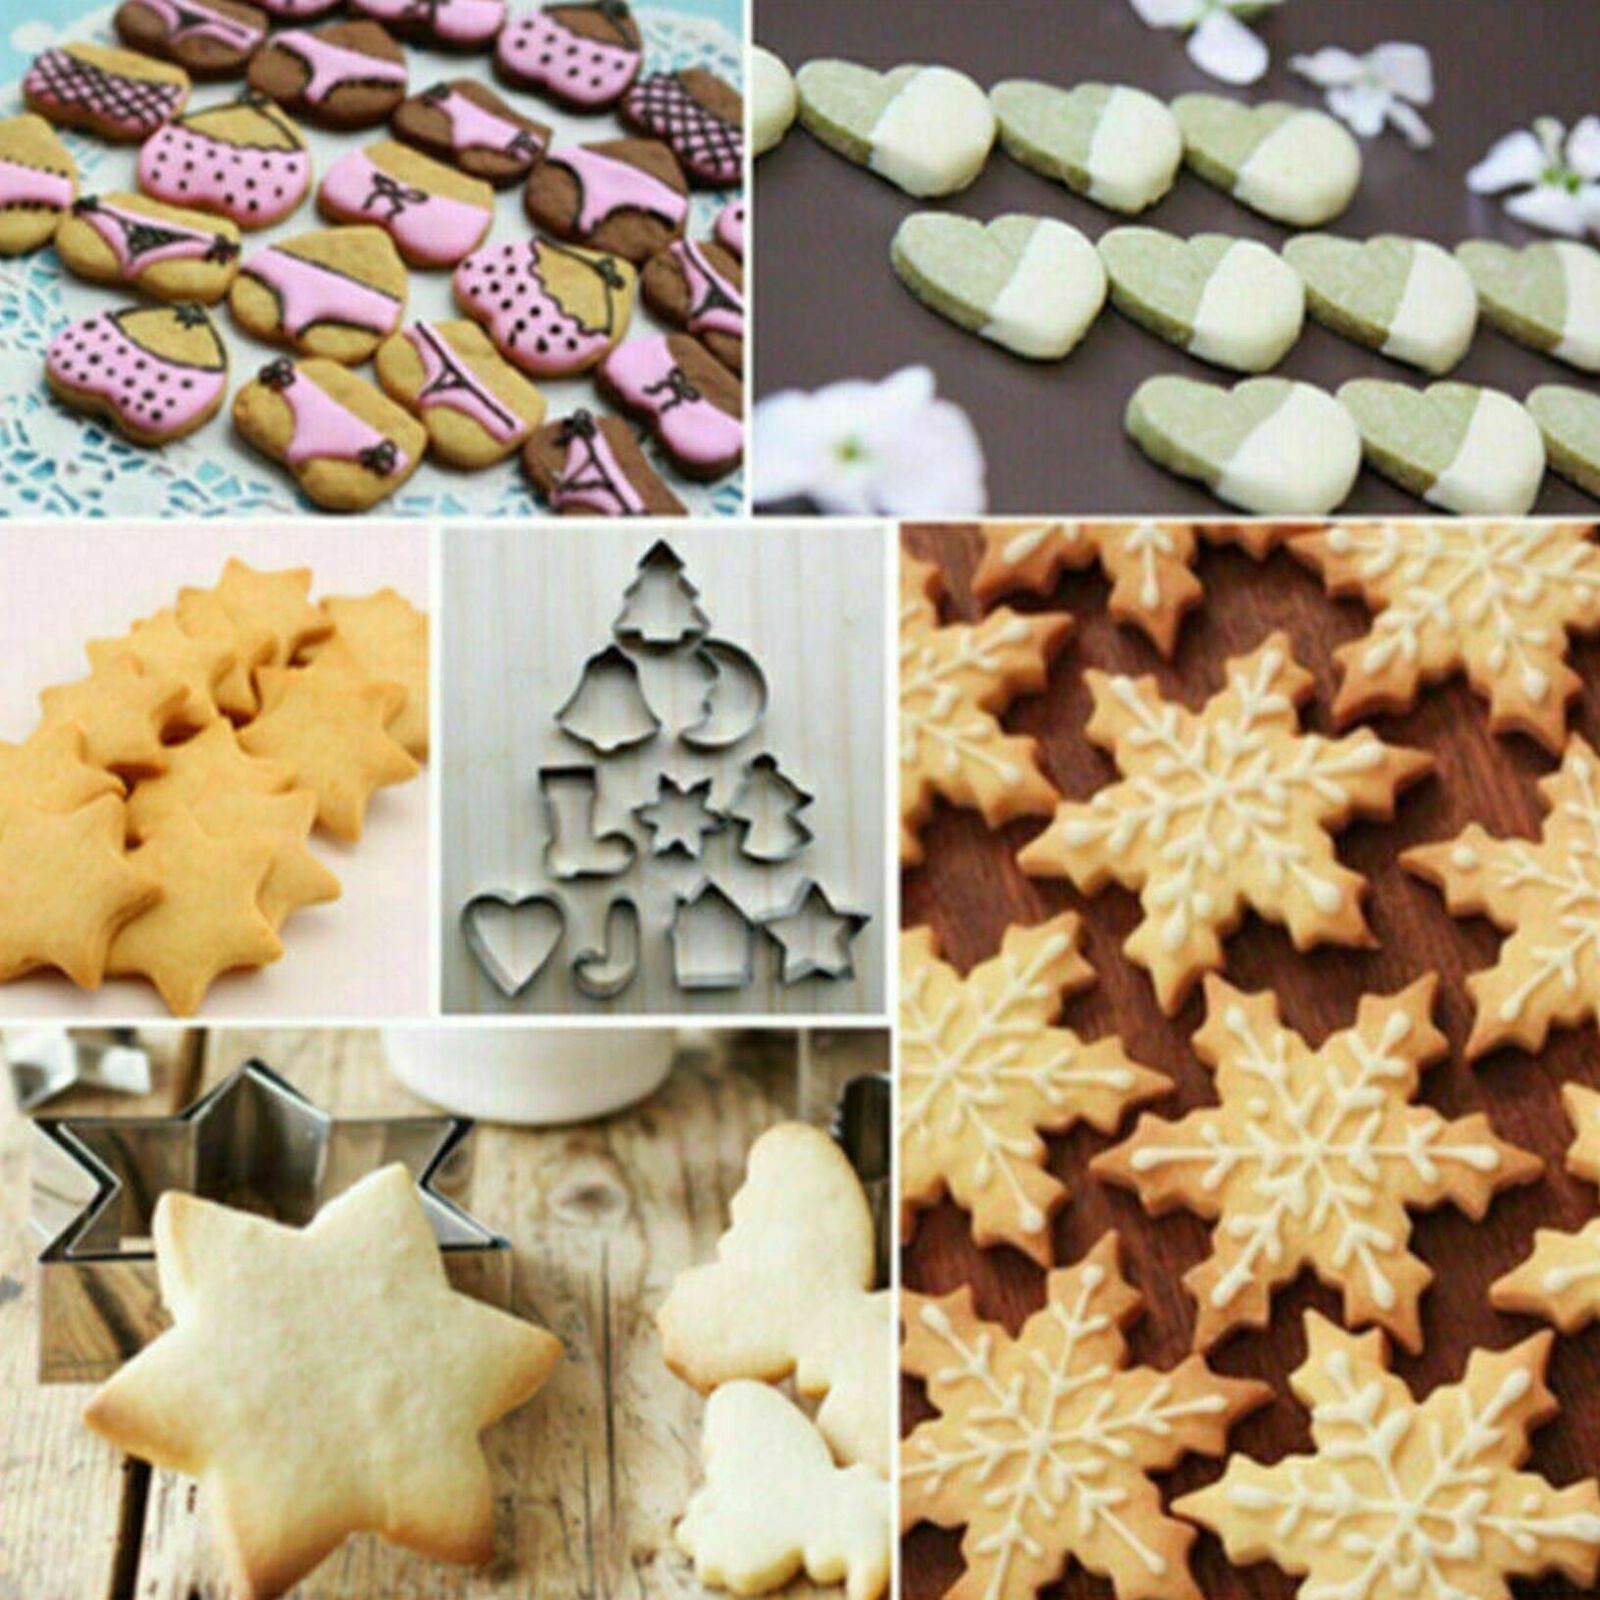 10pcs Christmas Metal Cookie Cutters Set Star Tree Bell Angel Candy Cane Biscuit